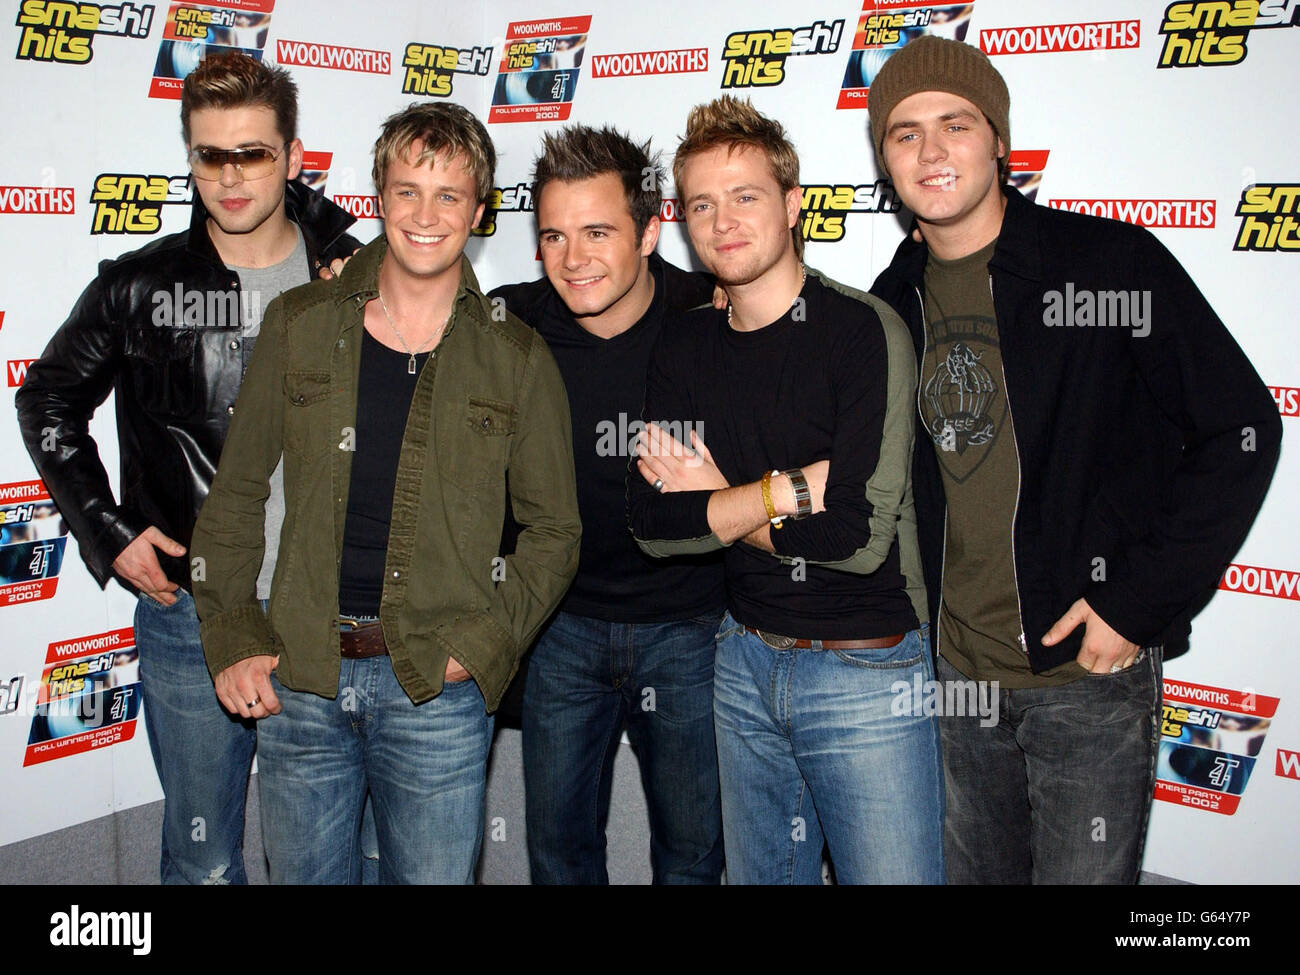 EDITORIAL USE ONLY : Westlife, (left-right) Mark Feehily, Kian Egan, Shane Filan, Nicky Byrne and Bryan McFadden who won awards for the Best Band on Planet Pop, Best International Act and a special award, *... The Smash Hits Cover of the Year at the Smash Hits T4 Poll Winners Party at the London Arena. 22/2/03: boy band Westlife have reassured fans that they have no intention of splitting up. Band member Shane Filan was reported to have threatened to quit following a row over the sacking of their tour manager. But today the boys issued a categorical denial and Shane said they were definitely Stock Photo